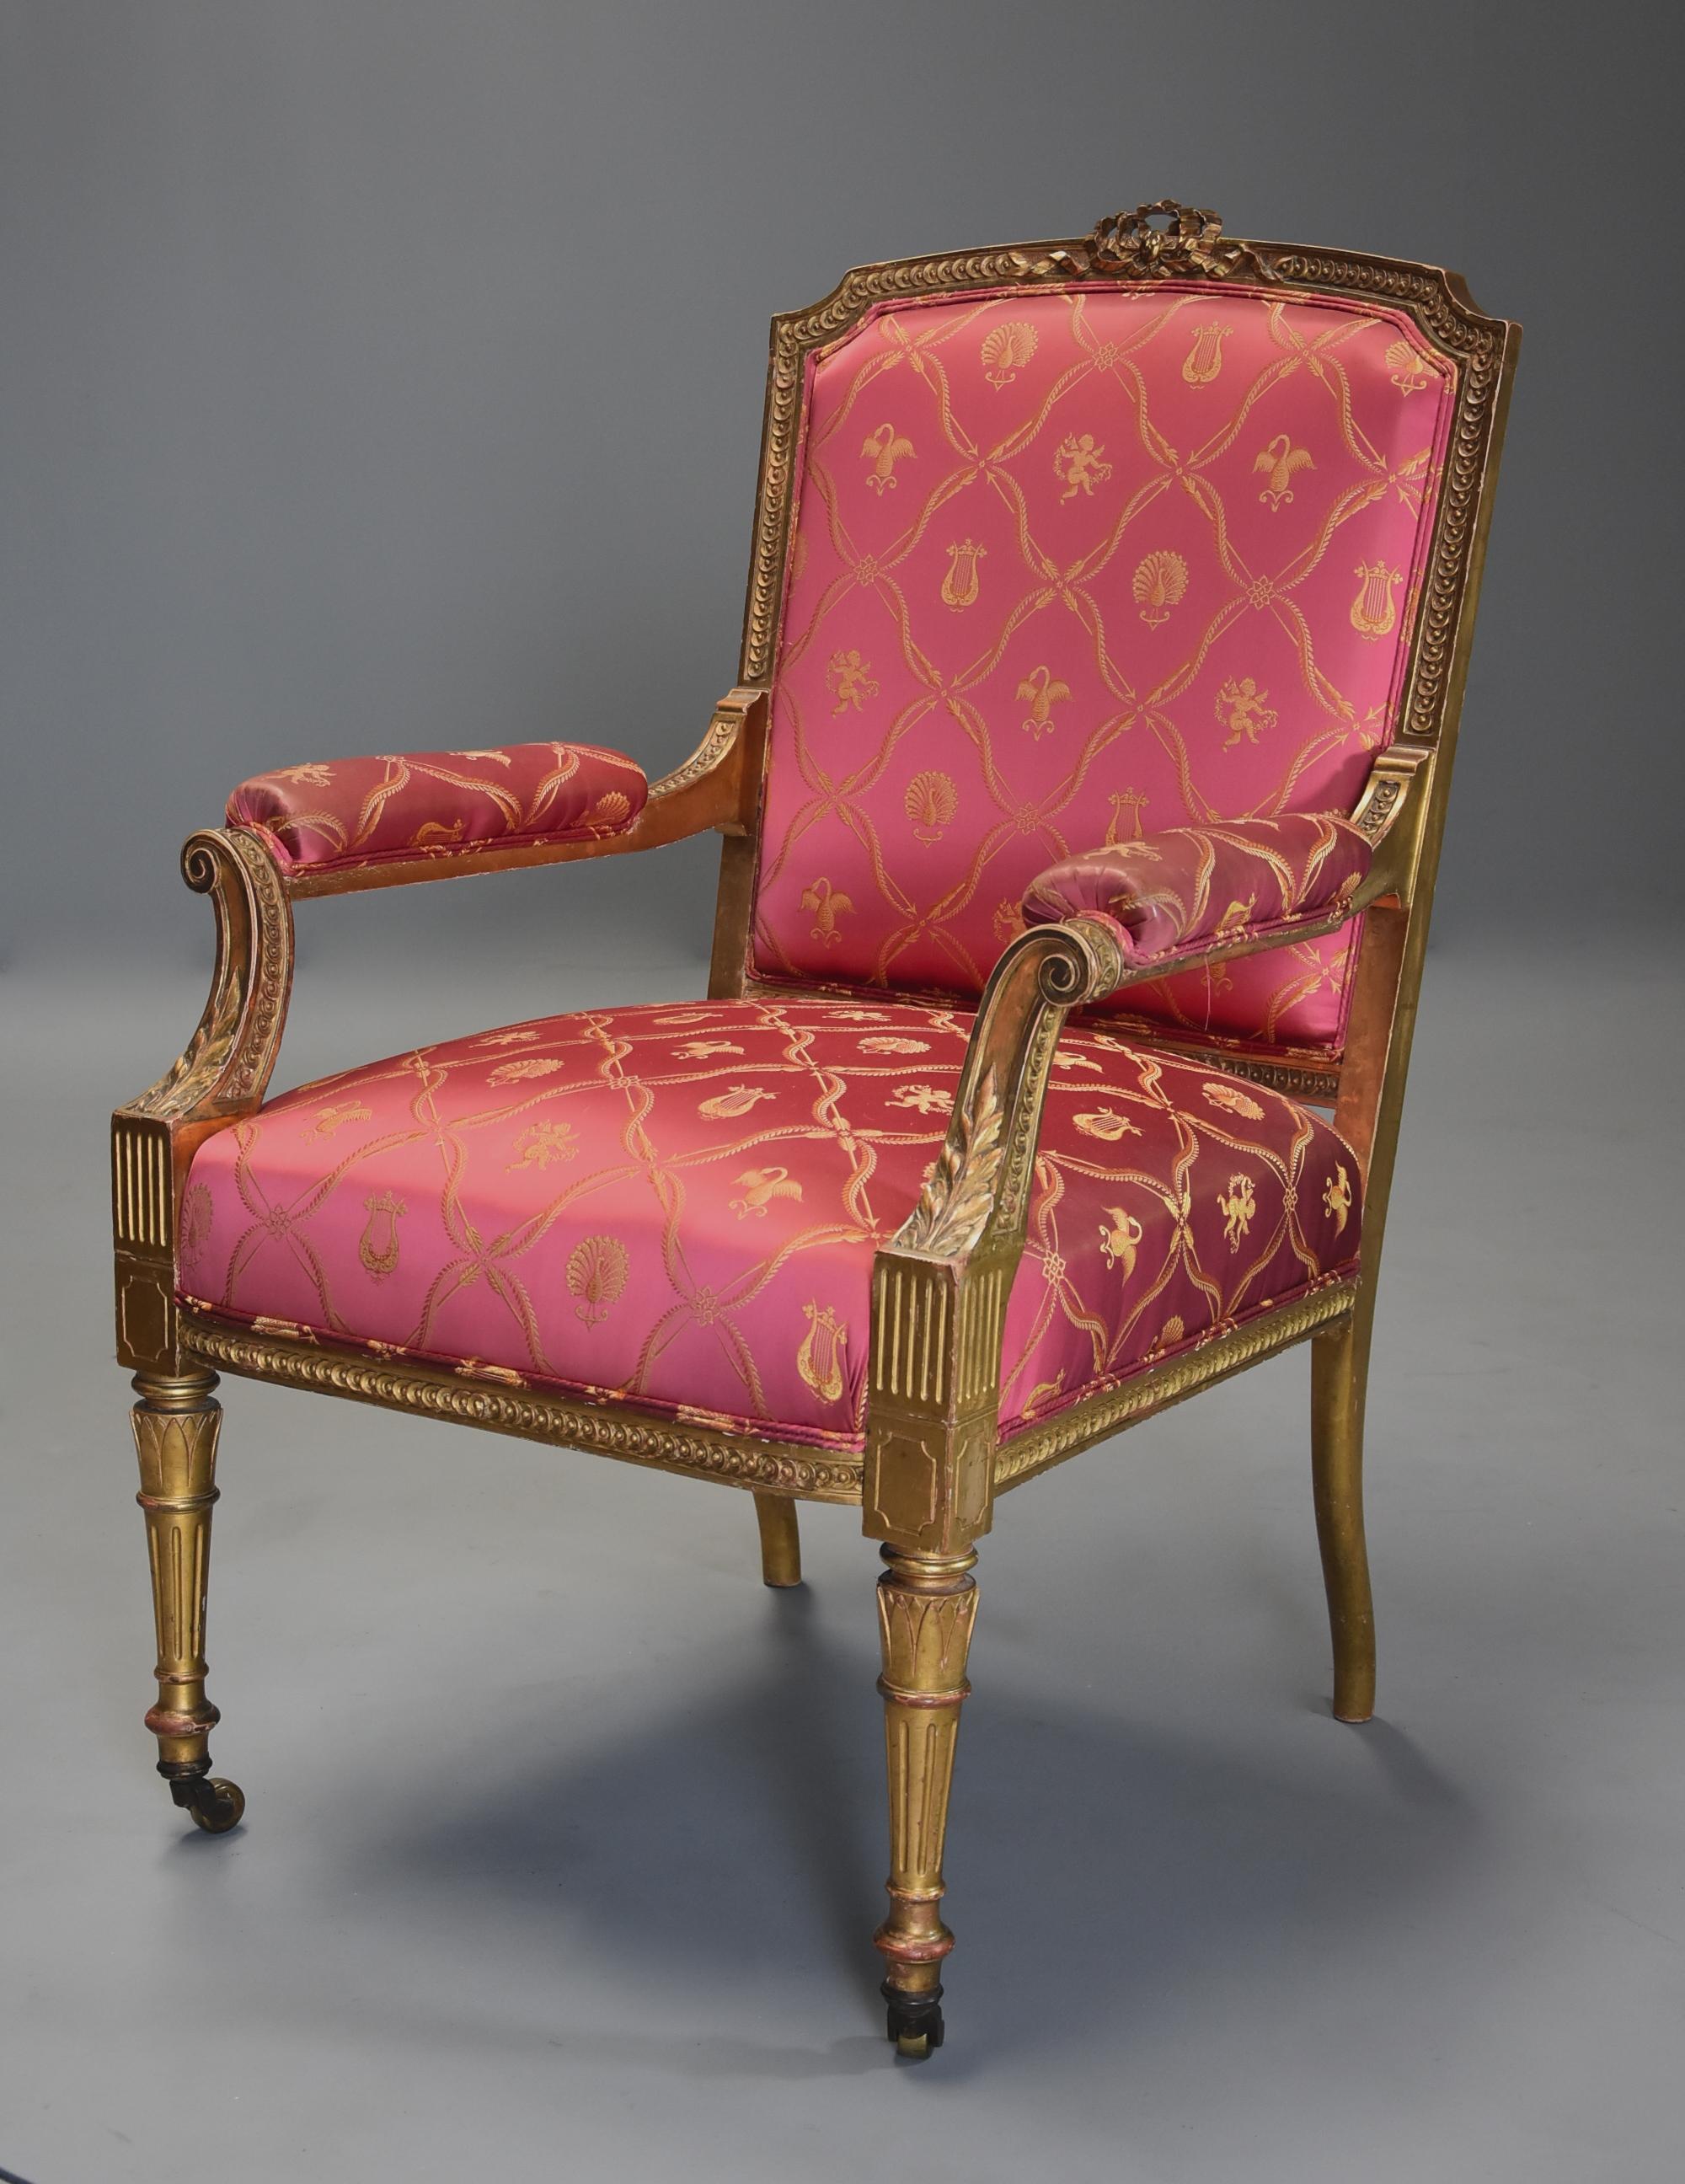 A late 19th century French carved giltwood fauteuil or open armchair of large proportions.

This chair consists of a carved top rail with ribbon design and carved circular decoration both to the top and uprights with an upholstered back.

This